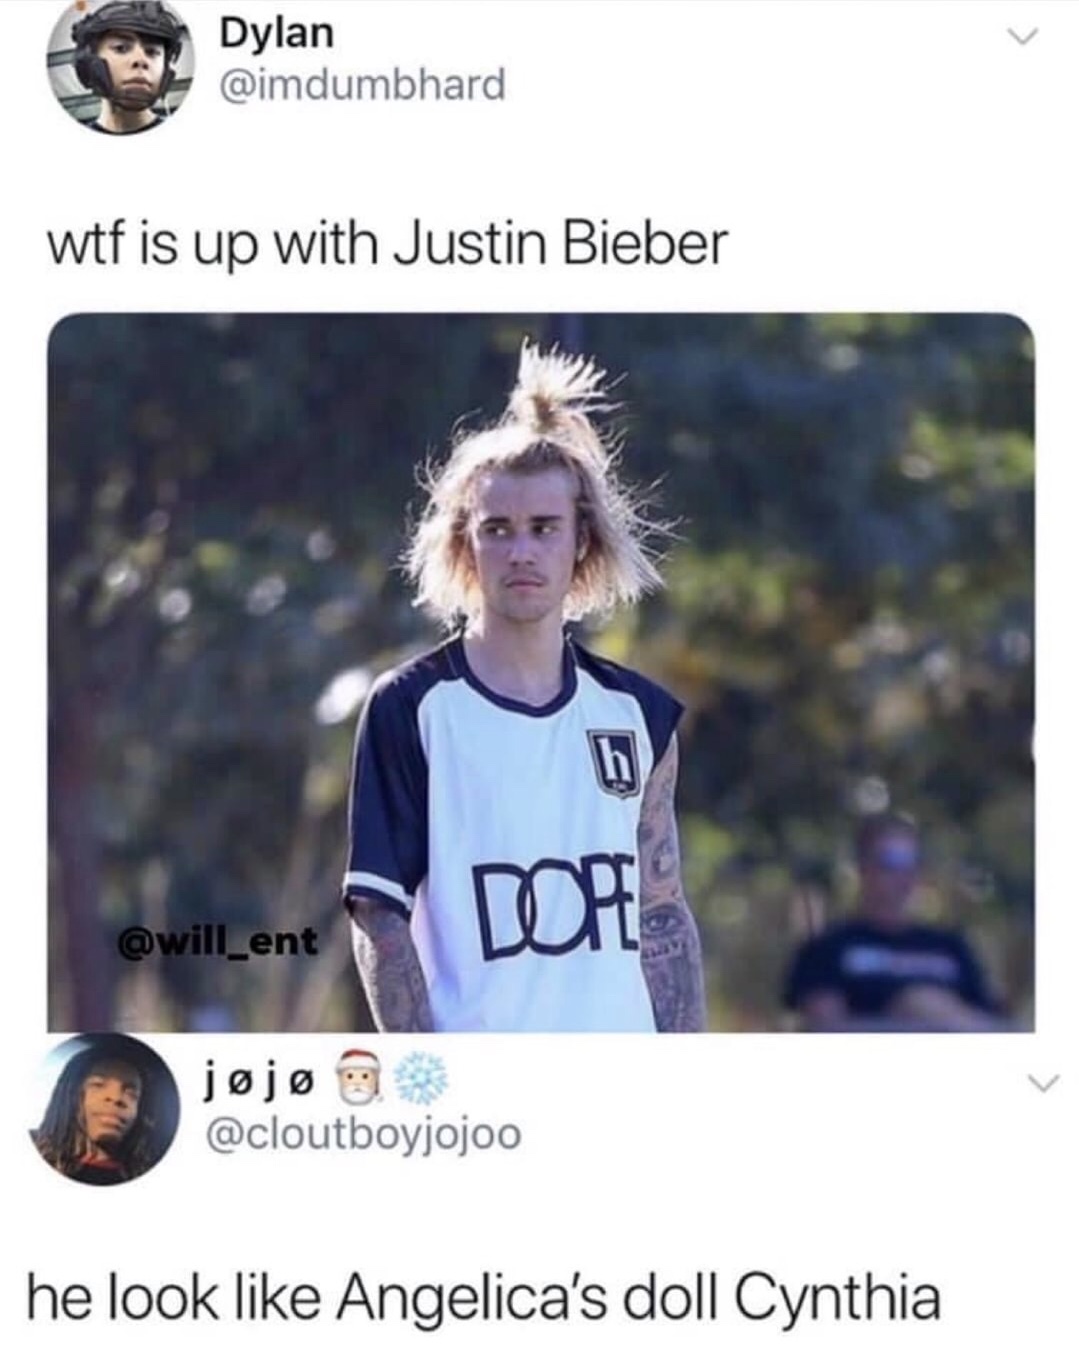 justin bieber cynthia rugrats - Dylan wtf is up with Justin Bieber Dope jojo he look Angelica's doll Cynthia